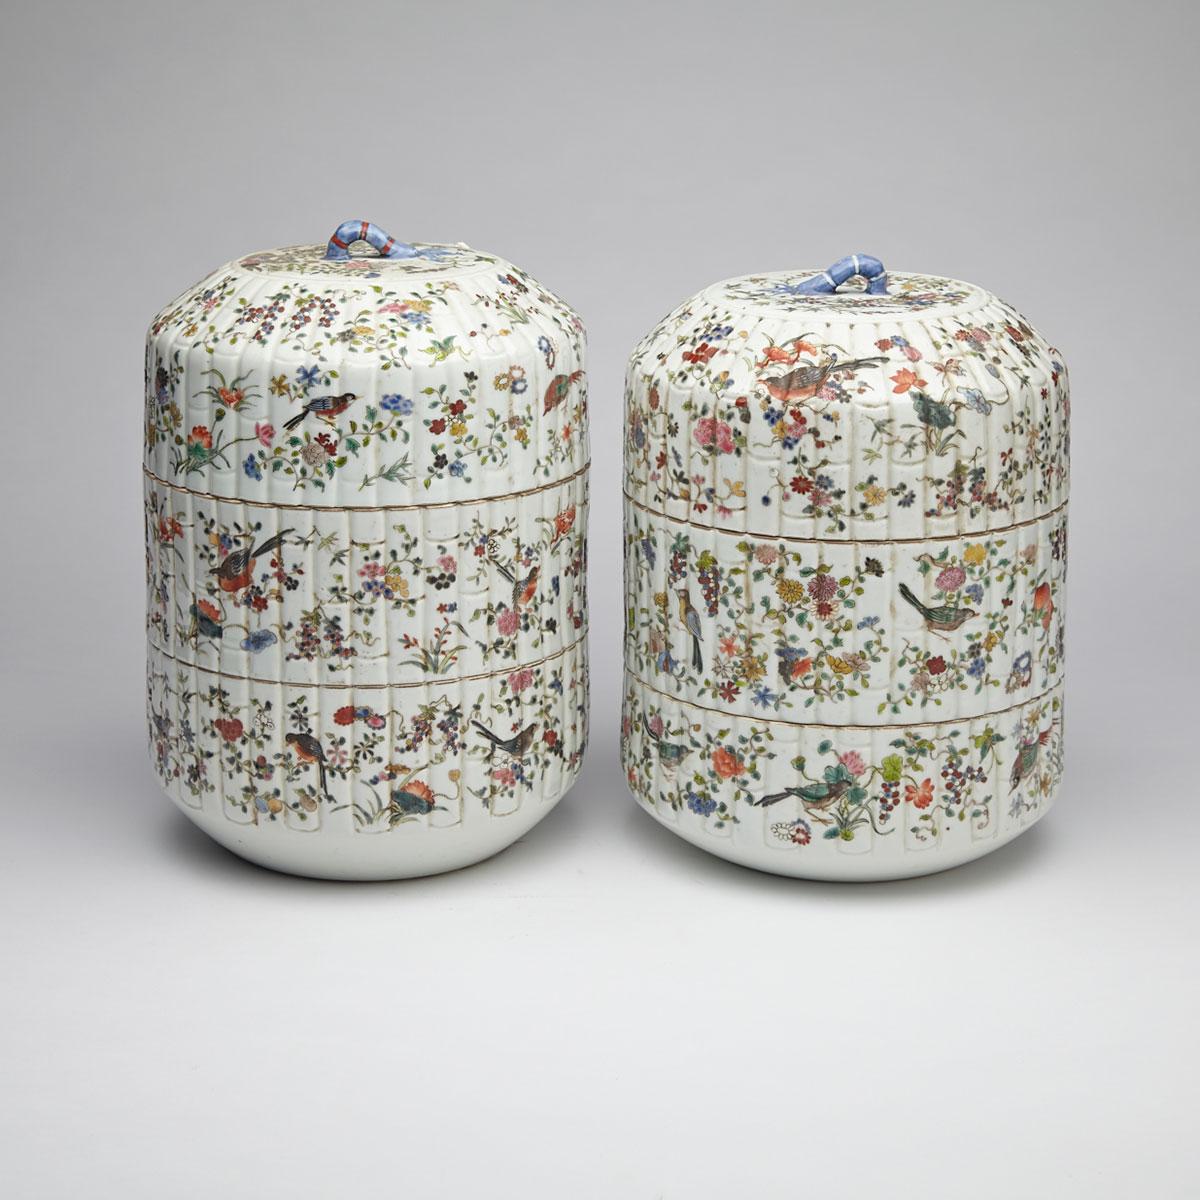 Pair of Famile Rose ‘Floral and Fauna’ Stacking Boxes and Covers